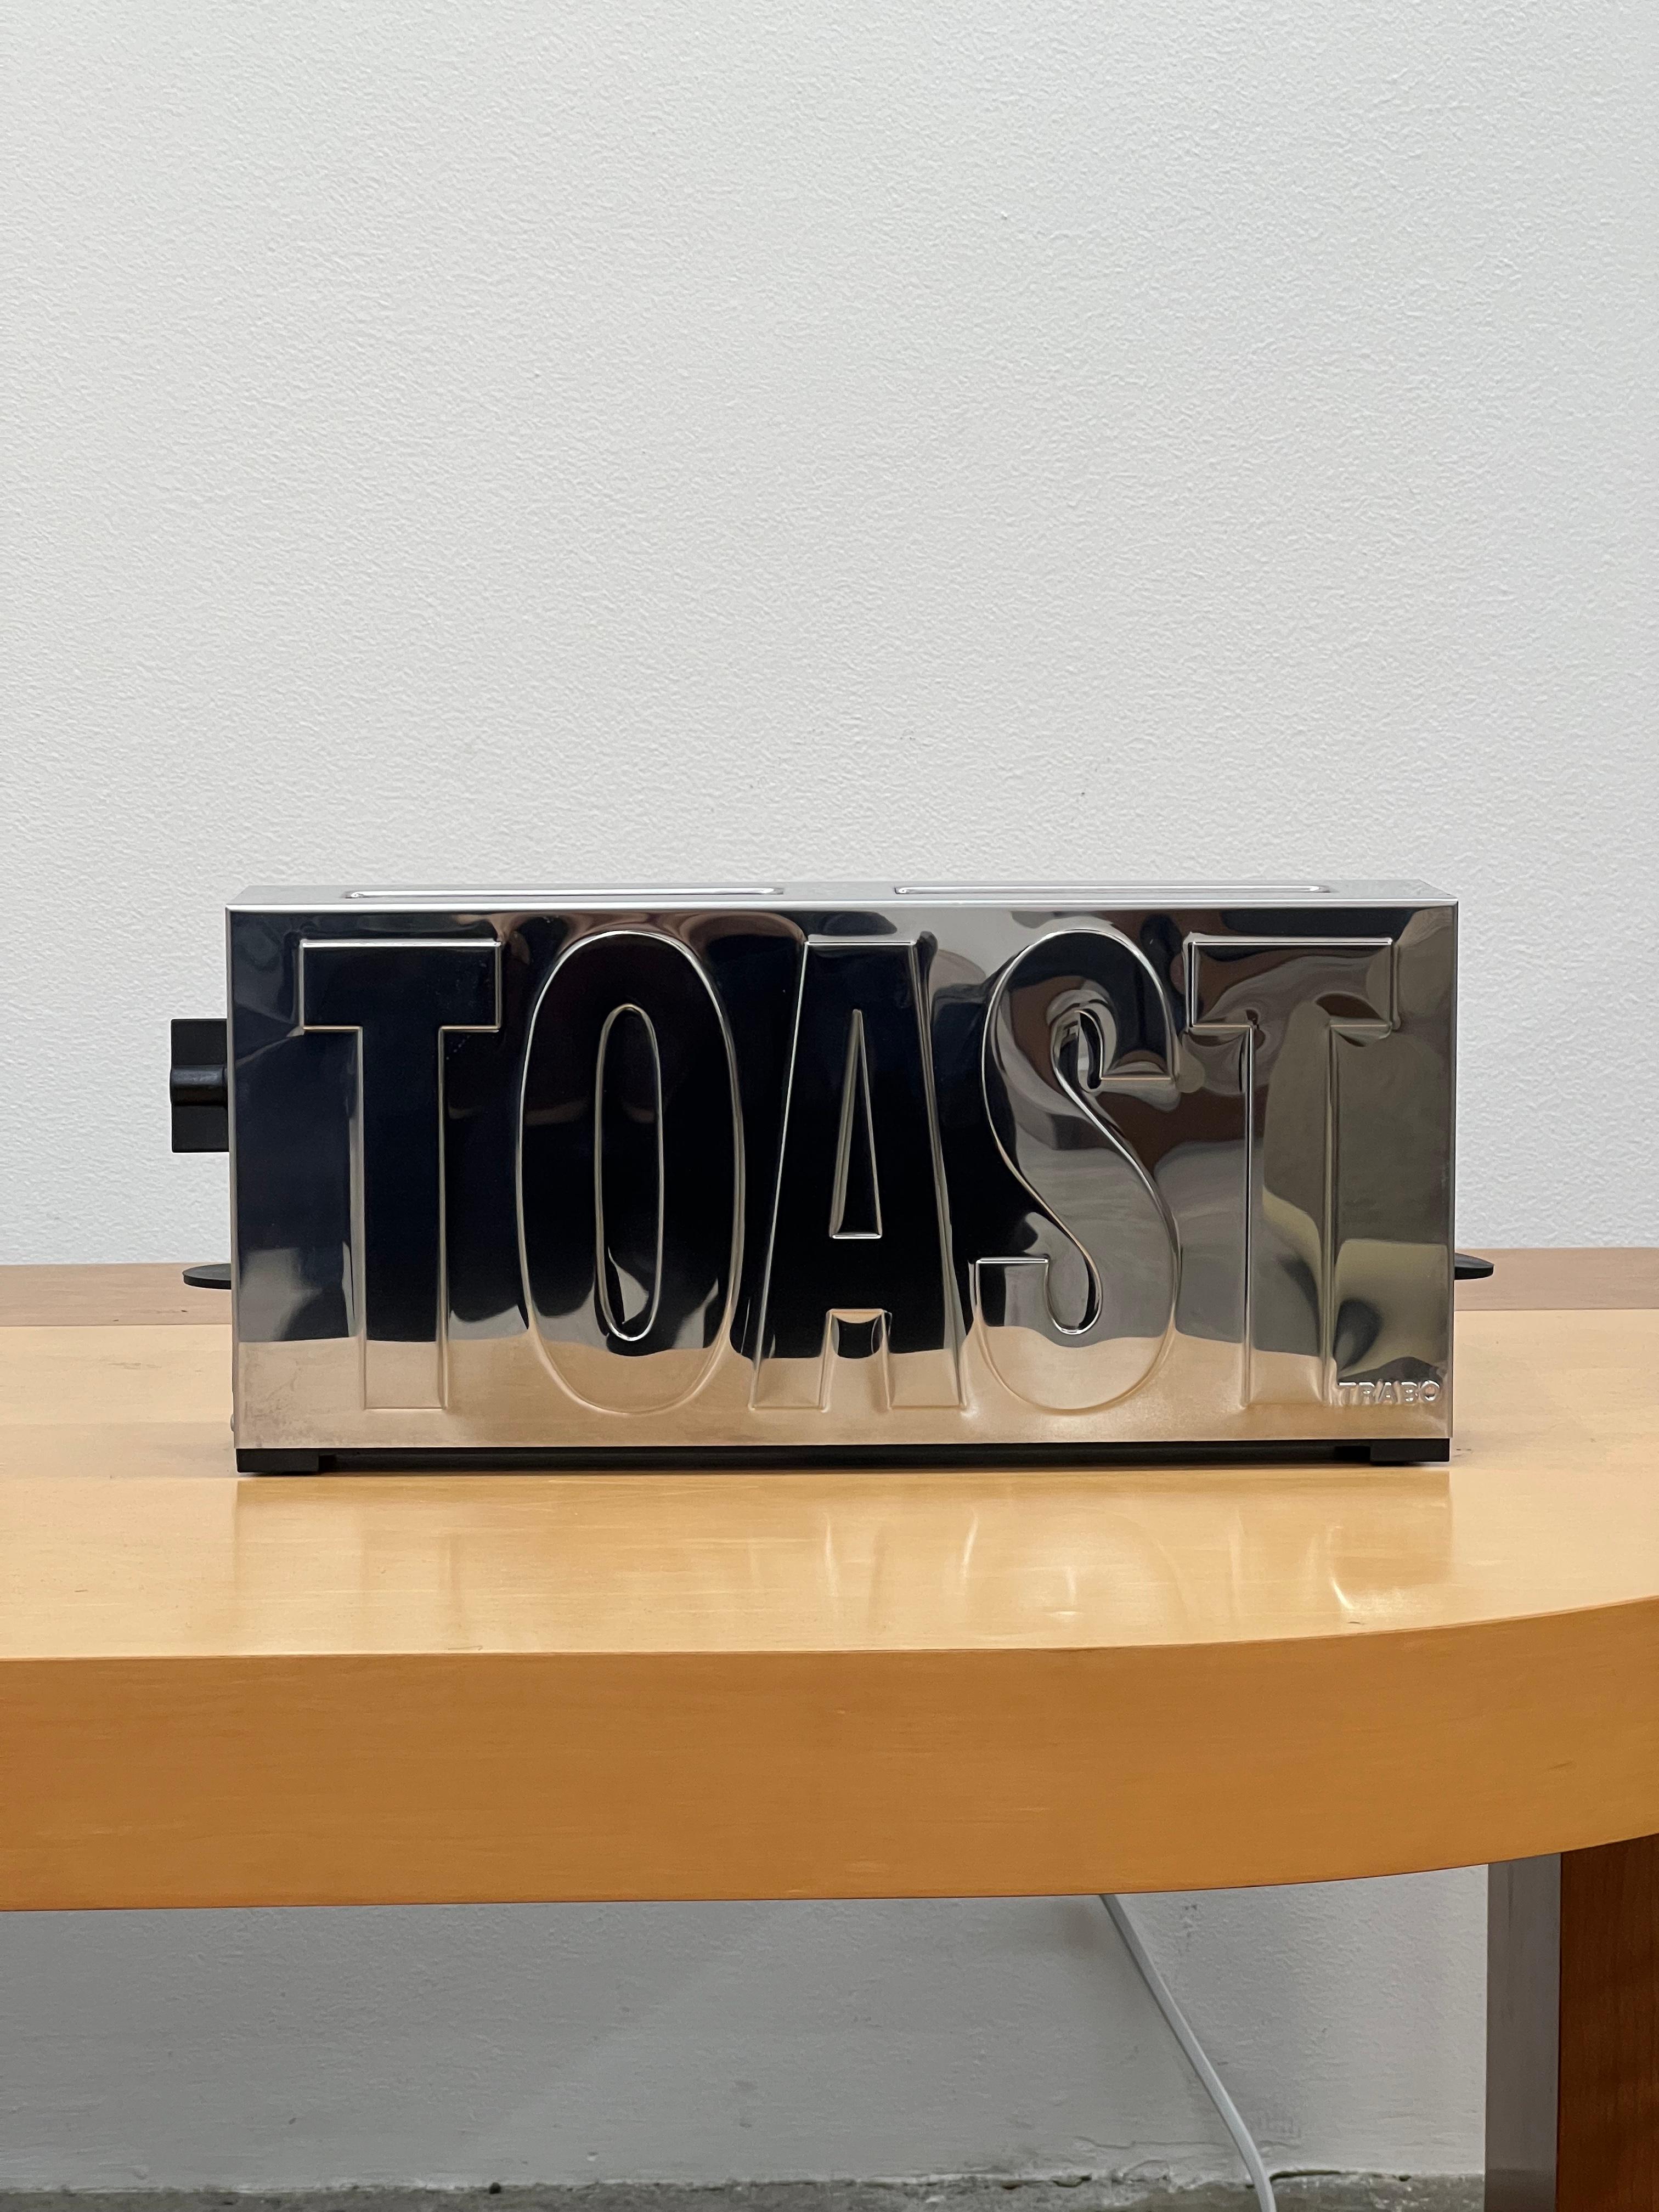 Designed in 1997

Give your kitchen worktop a pop of colour with the TOAST Toaster by Italian designer, Gae Aulenti.

Comprised of a stainless steel casing and cool-touch plastic moulding details, the bold design also boasts a removable cable,